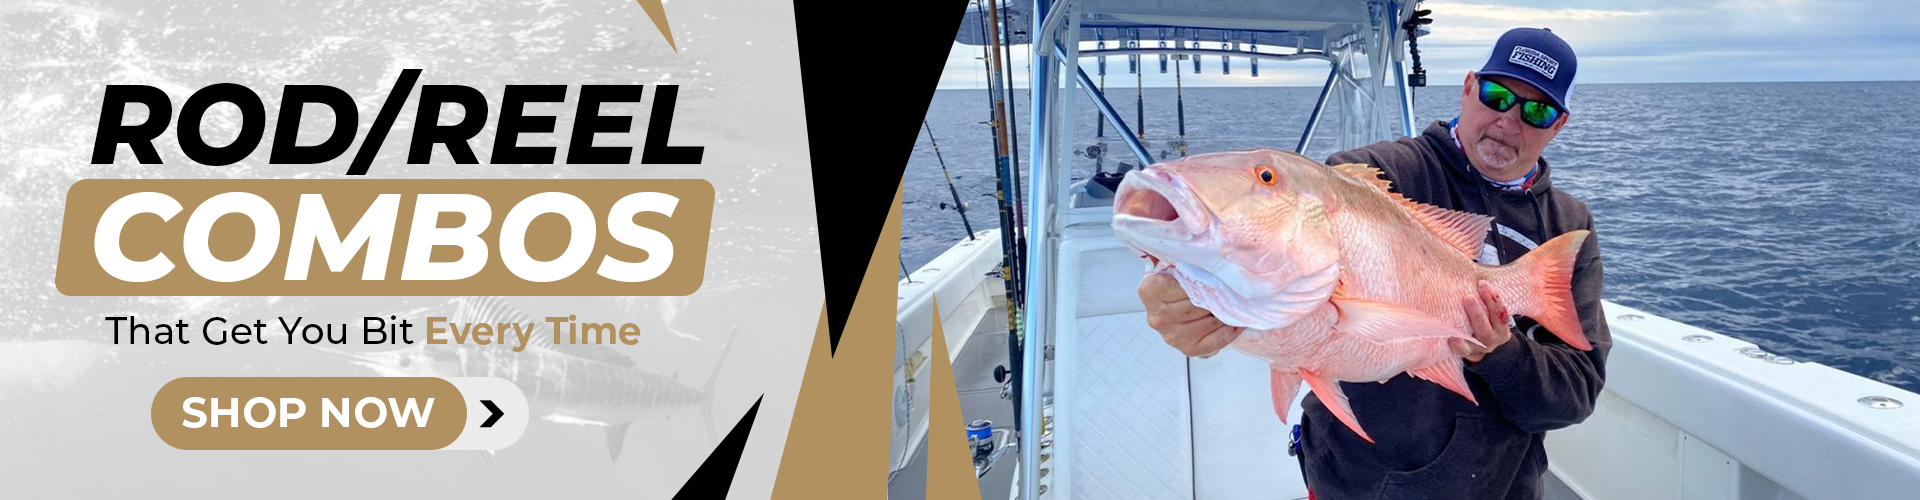 Rod /Reel Combo Banner That Get you bite every time.  Picture on right of a person with a very big fish.